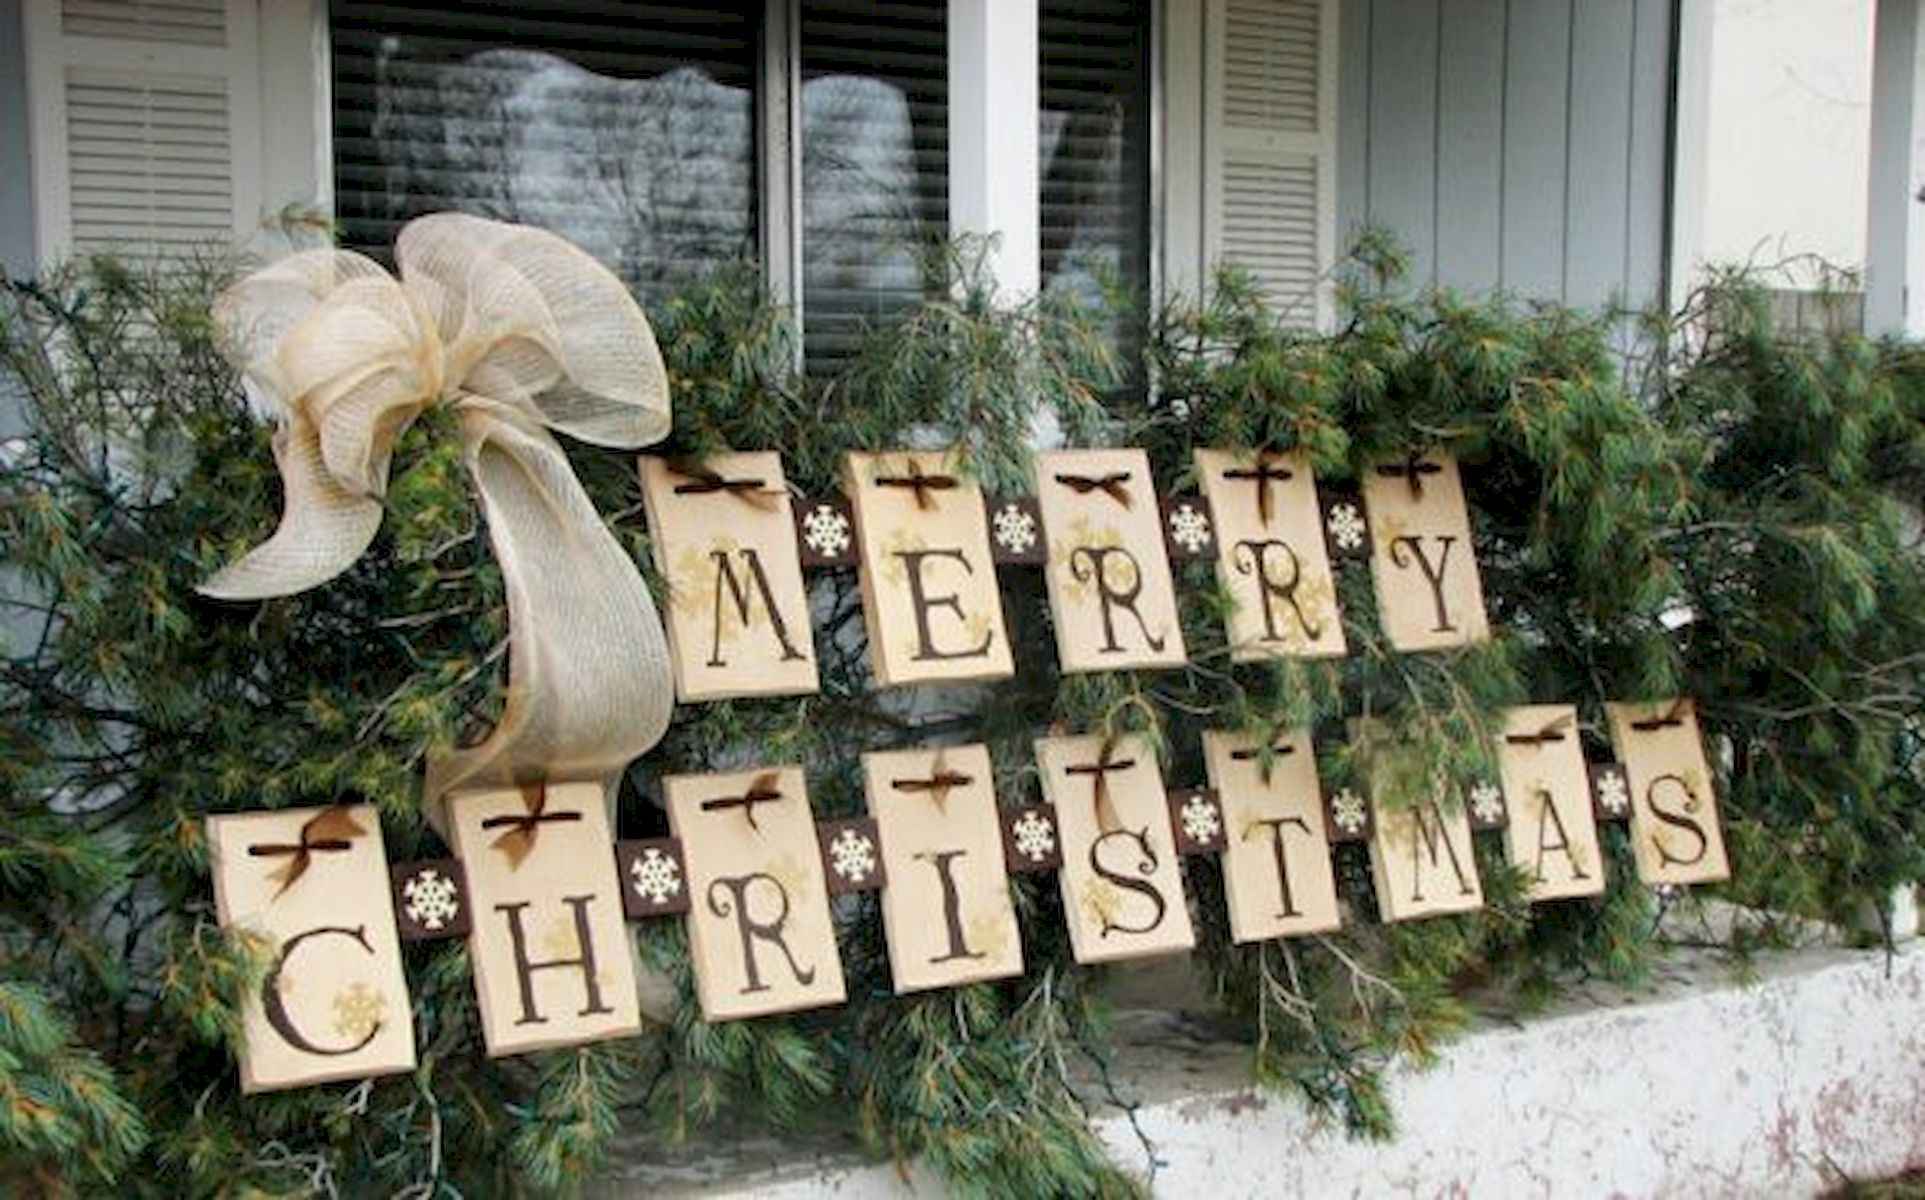 40-Cheap-and-Easy-Christmas-Decorations-